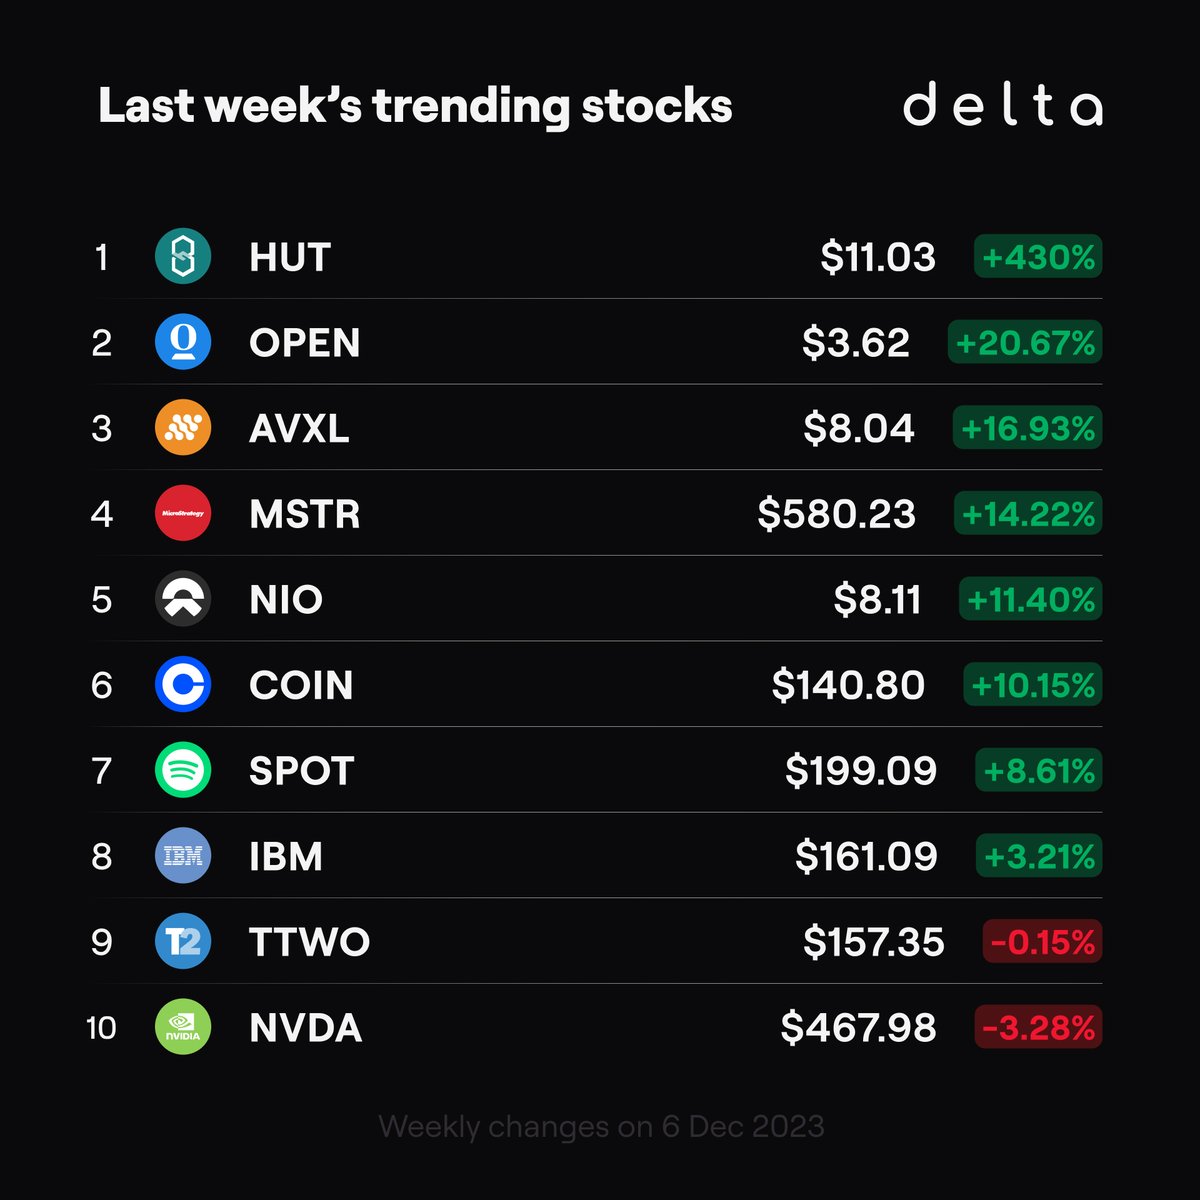 Here's what climbed to the top of the Delta Trending this week 🧗‍♂️

#HUT | Hut 8
#OPEN | Opendoor Tech
#AVXL | Anavex Life Sciences
#MSTR | MicroStrategy
#NIO | NIO
#COIN | Coinbase
#SPOT | Spotify
#IBM | International Business Machines
#TTWO | Take-Two Interactive
#NVDA | Nvidia